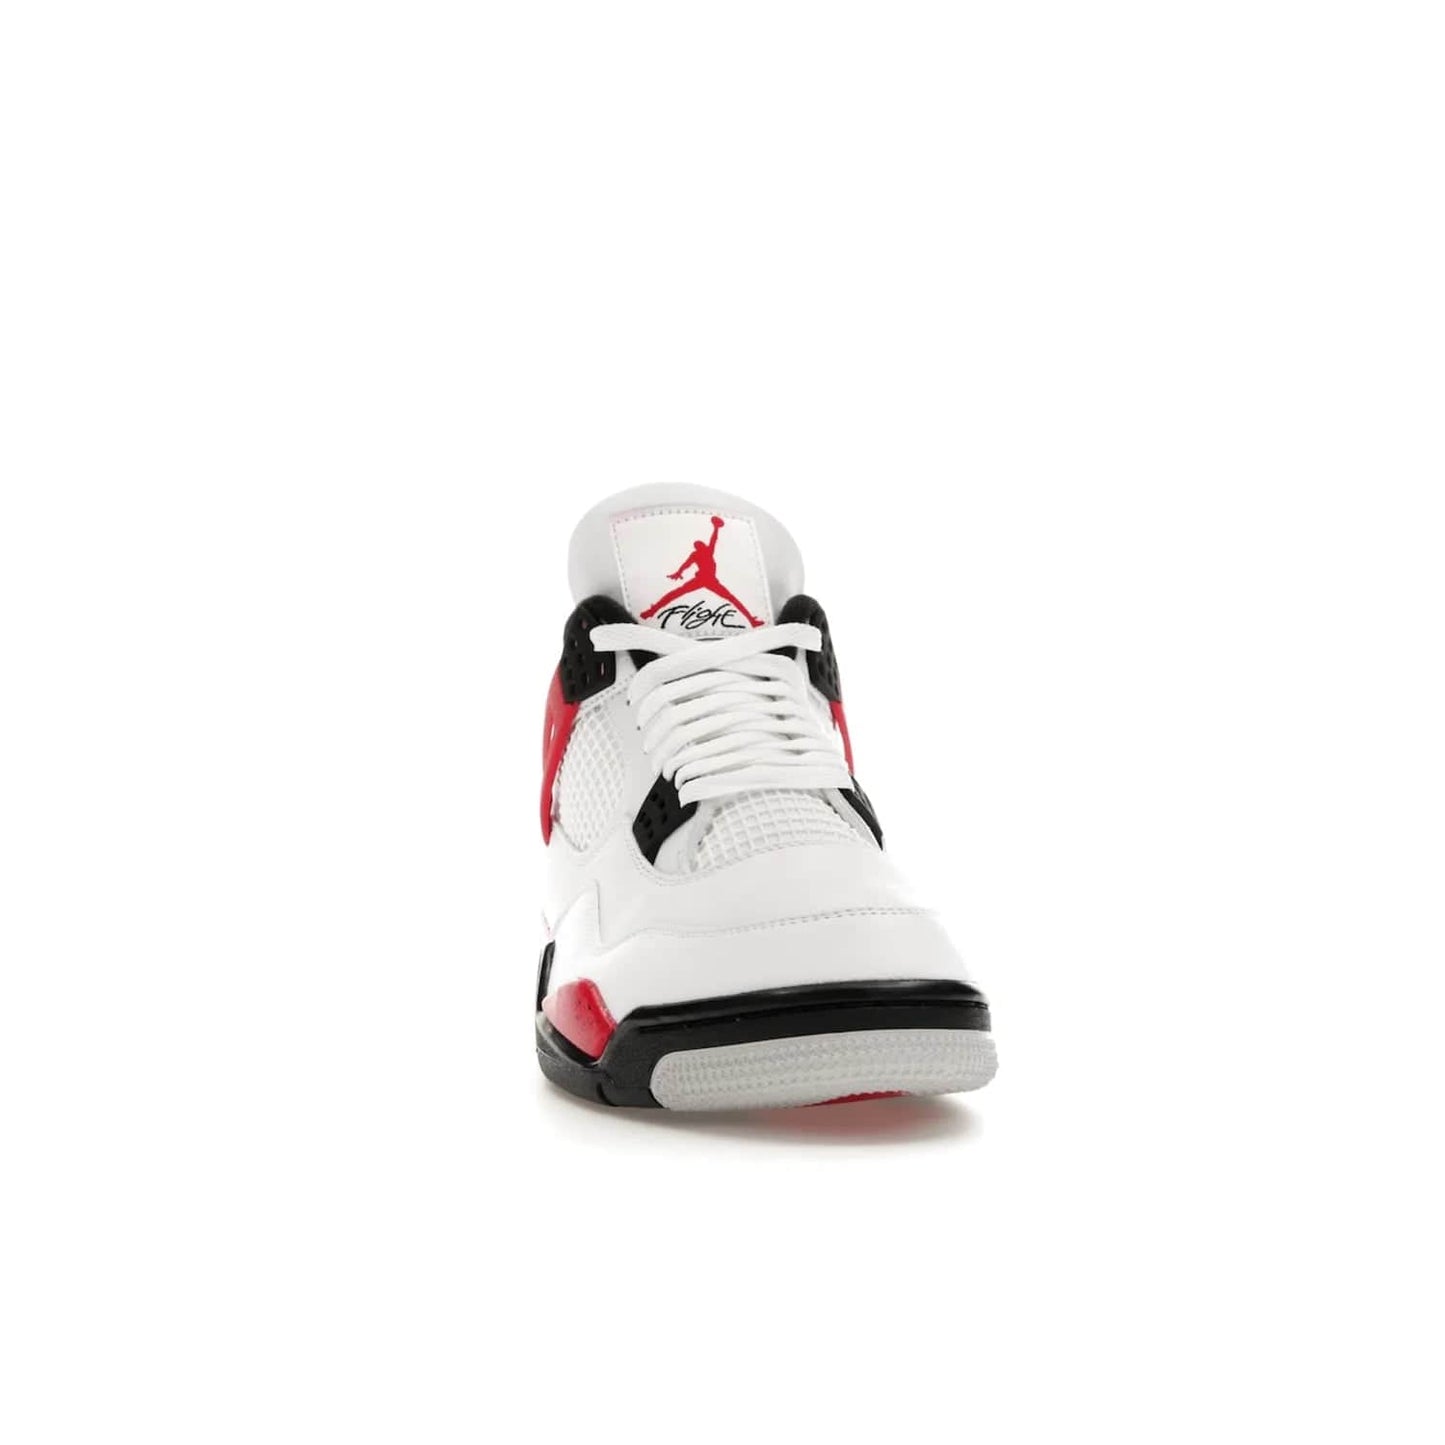 Jordan 4 Retro Red Cement - Image 9 - Only at www.BallersClubKickz.com - Iconic Jordan silhouette with a unique twist. White premium leather uppers with fire red and black detailing. Black, white, and fire red midsole with mesh detailing and Jumpman logo. Jordan 4 Retro Red Cement released with premium price.